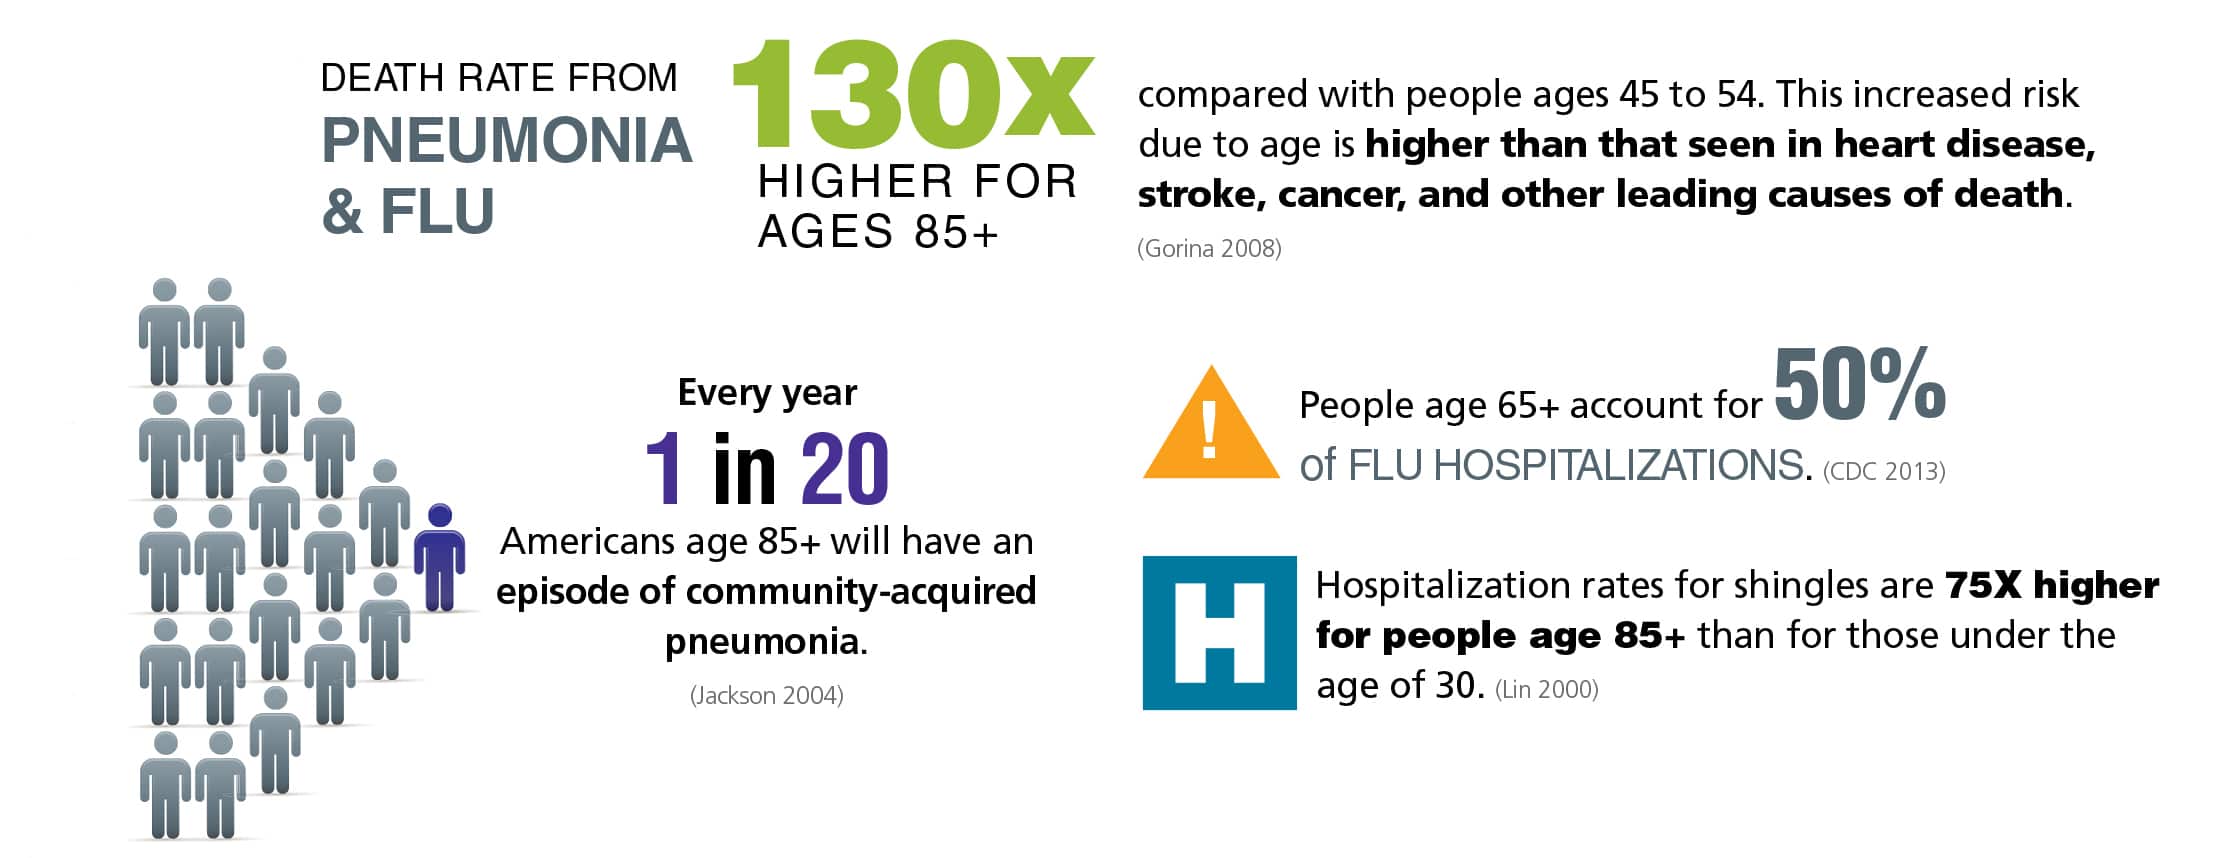 Infographic on the death rate from pneumonia & flu